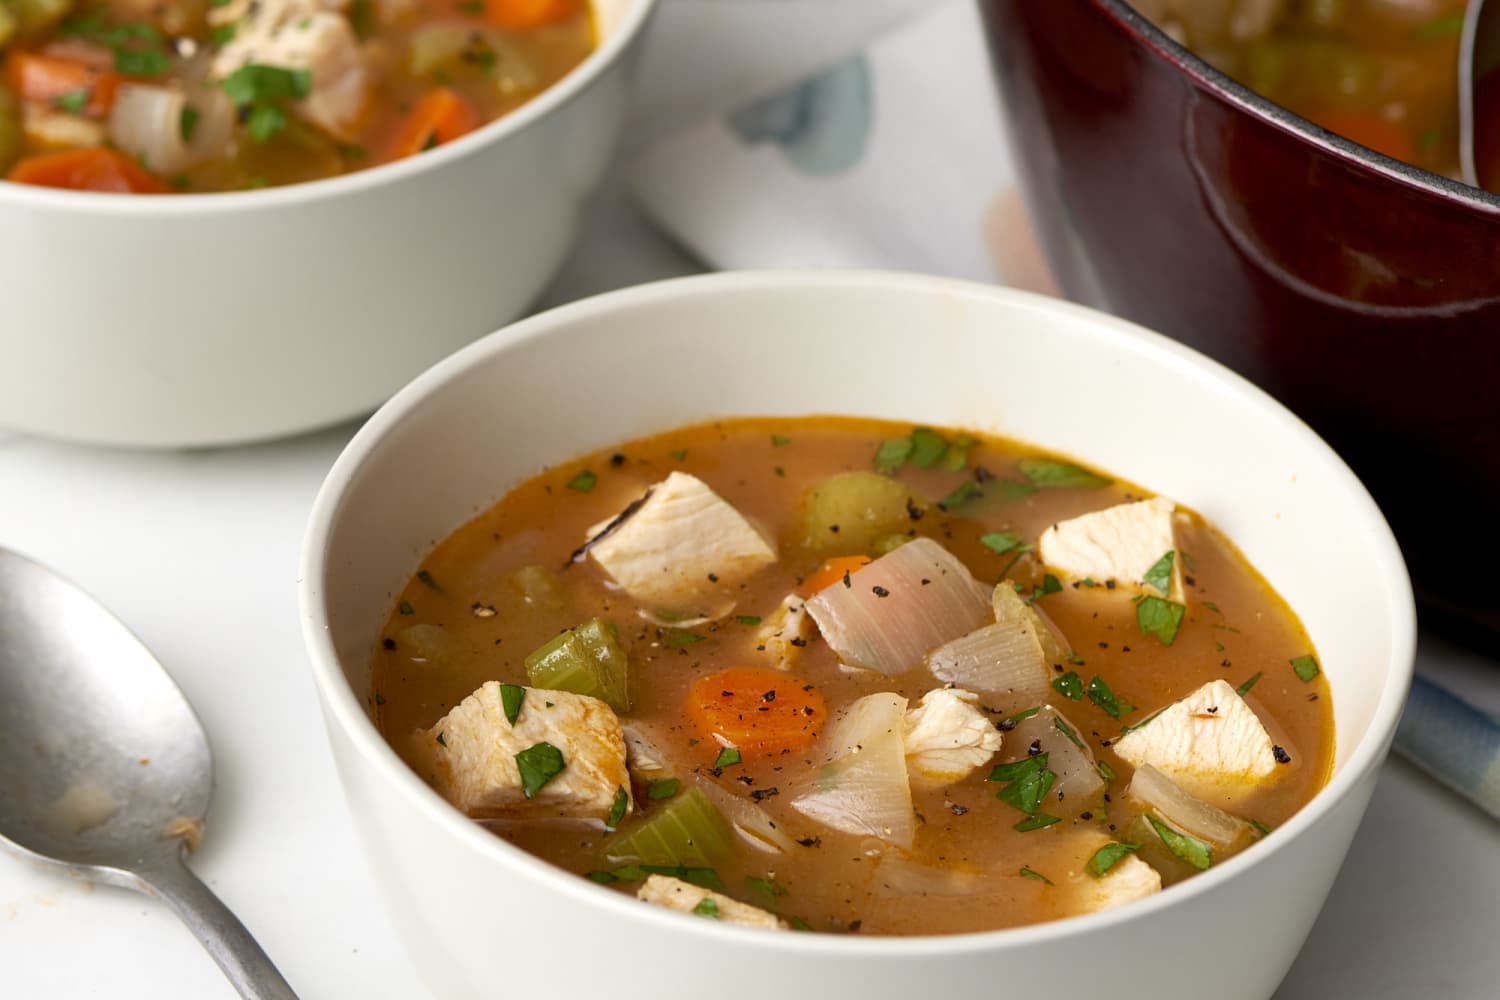 Leftover Turkey Vegetable Soup Recipe (Hearty & Comforting)